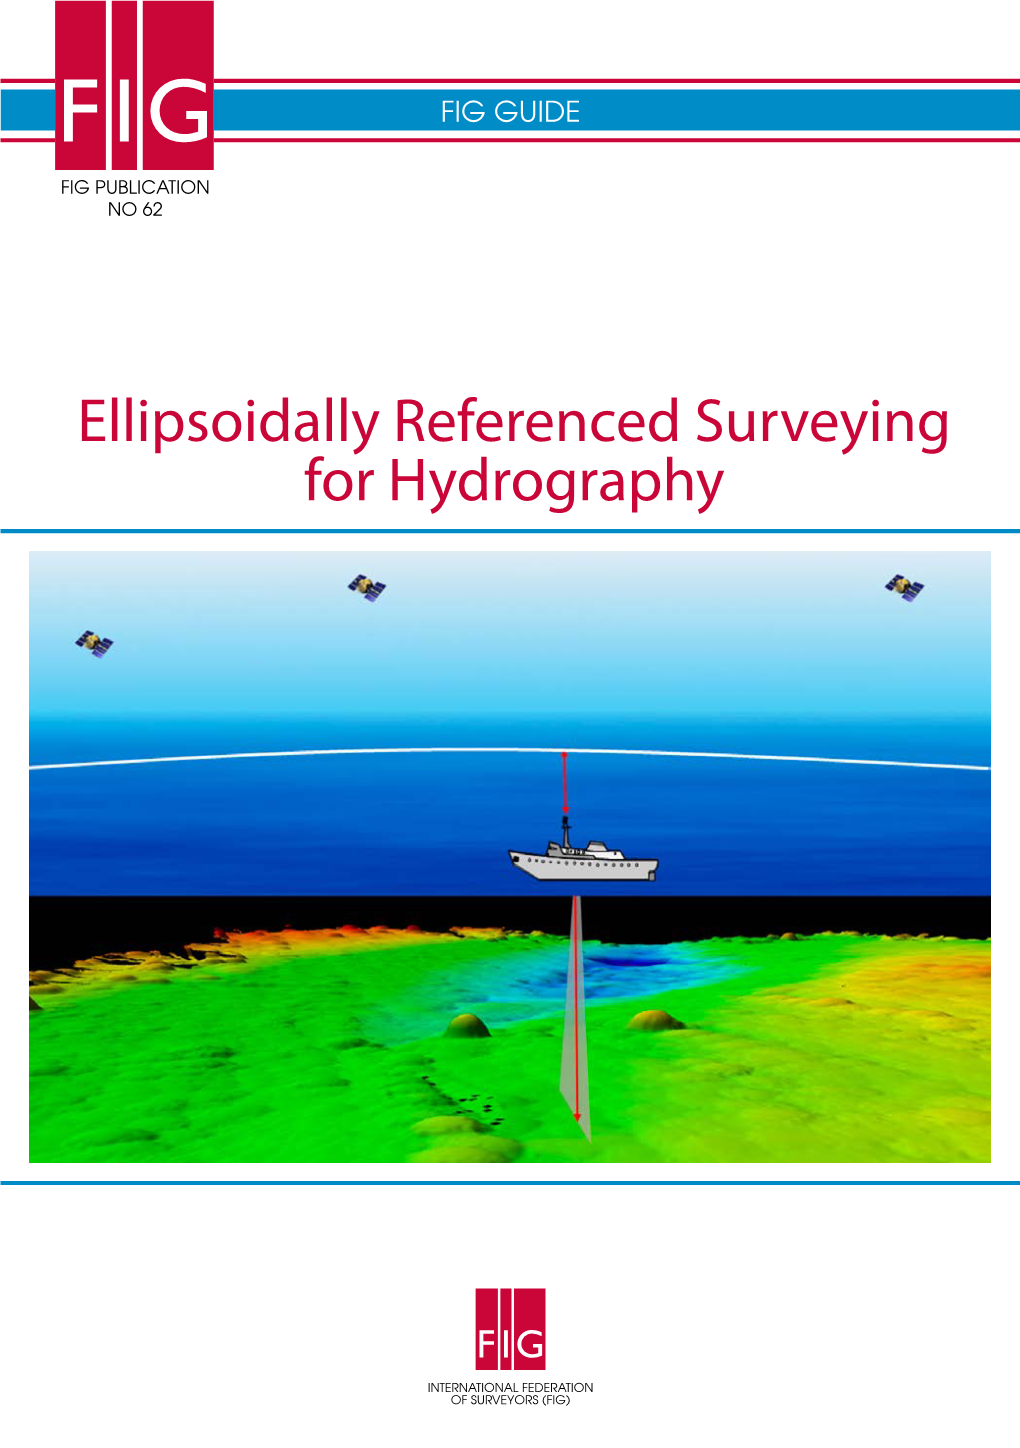 Ellipsoidally Referenced Surveying for Hydrography